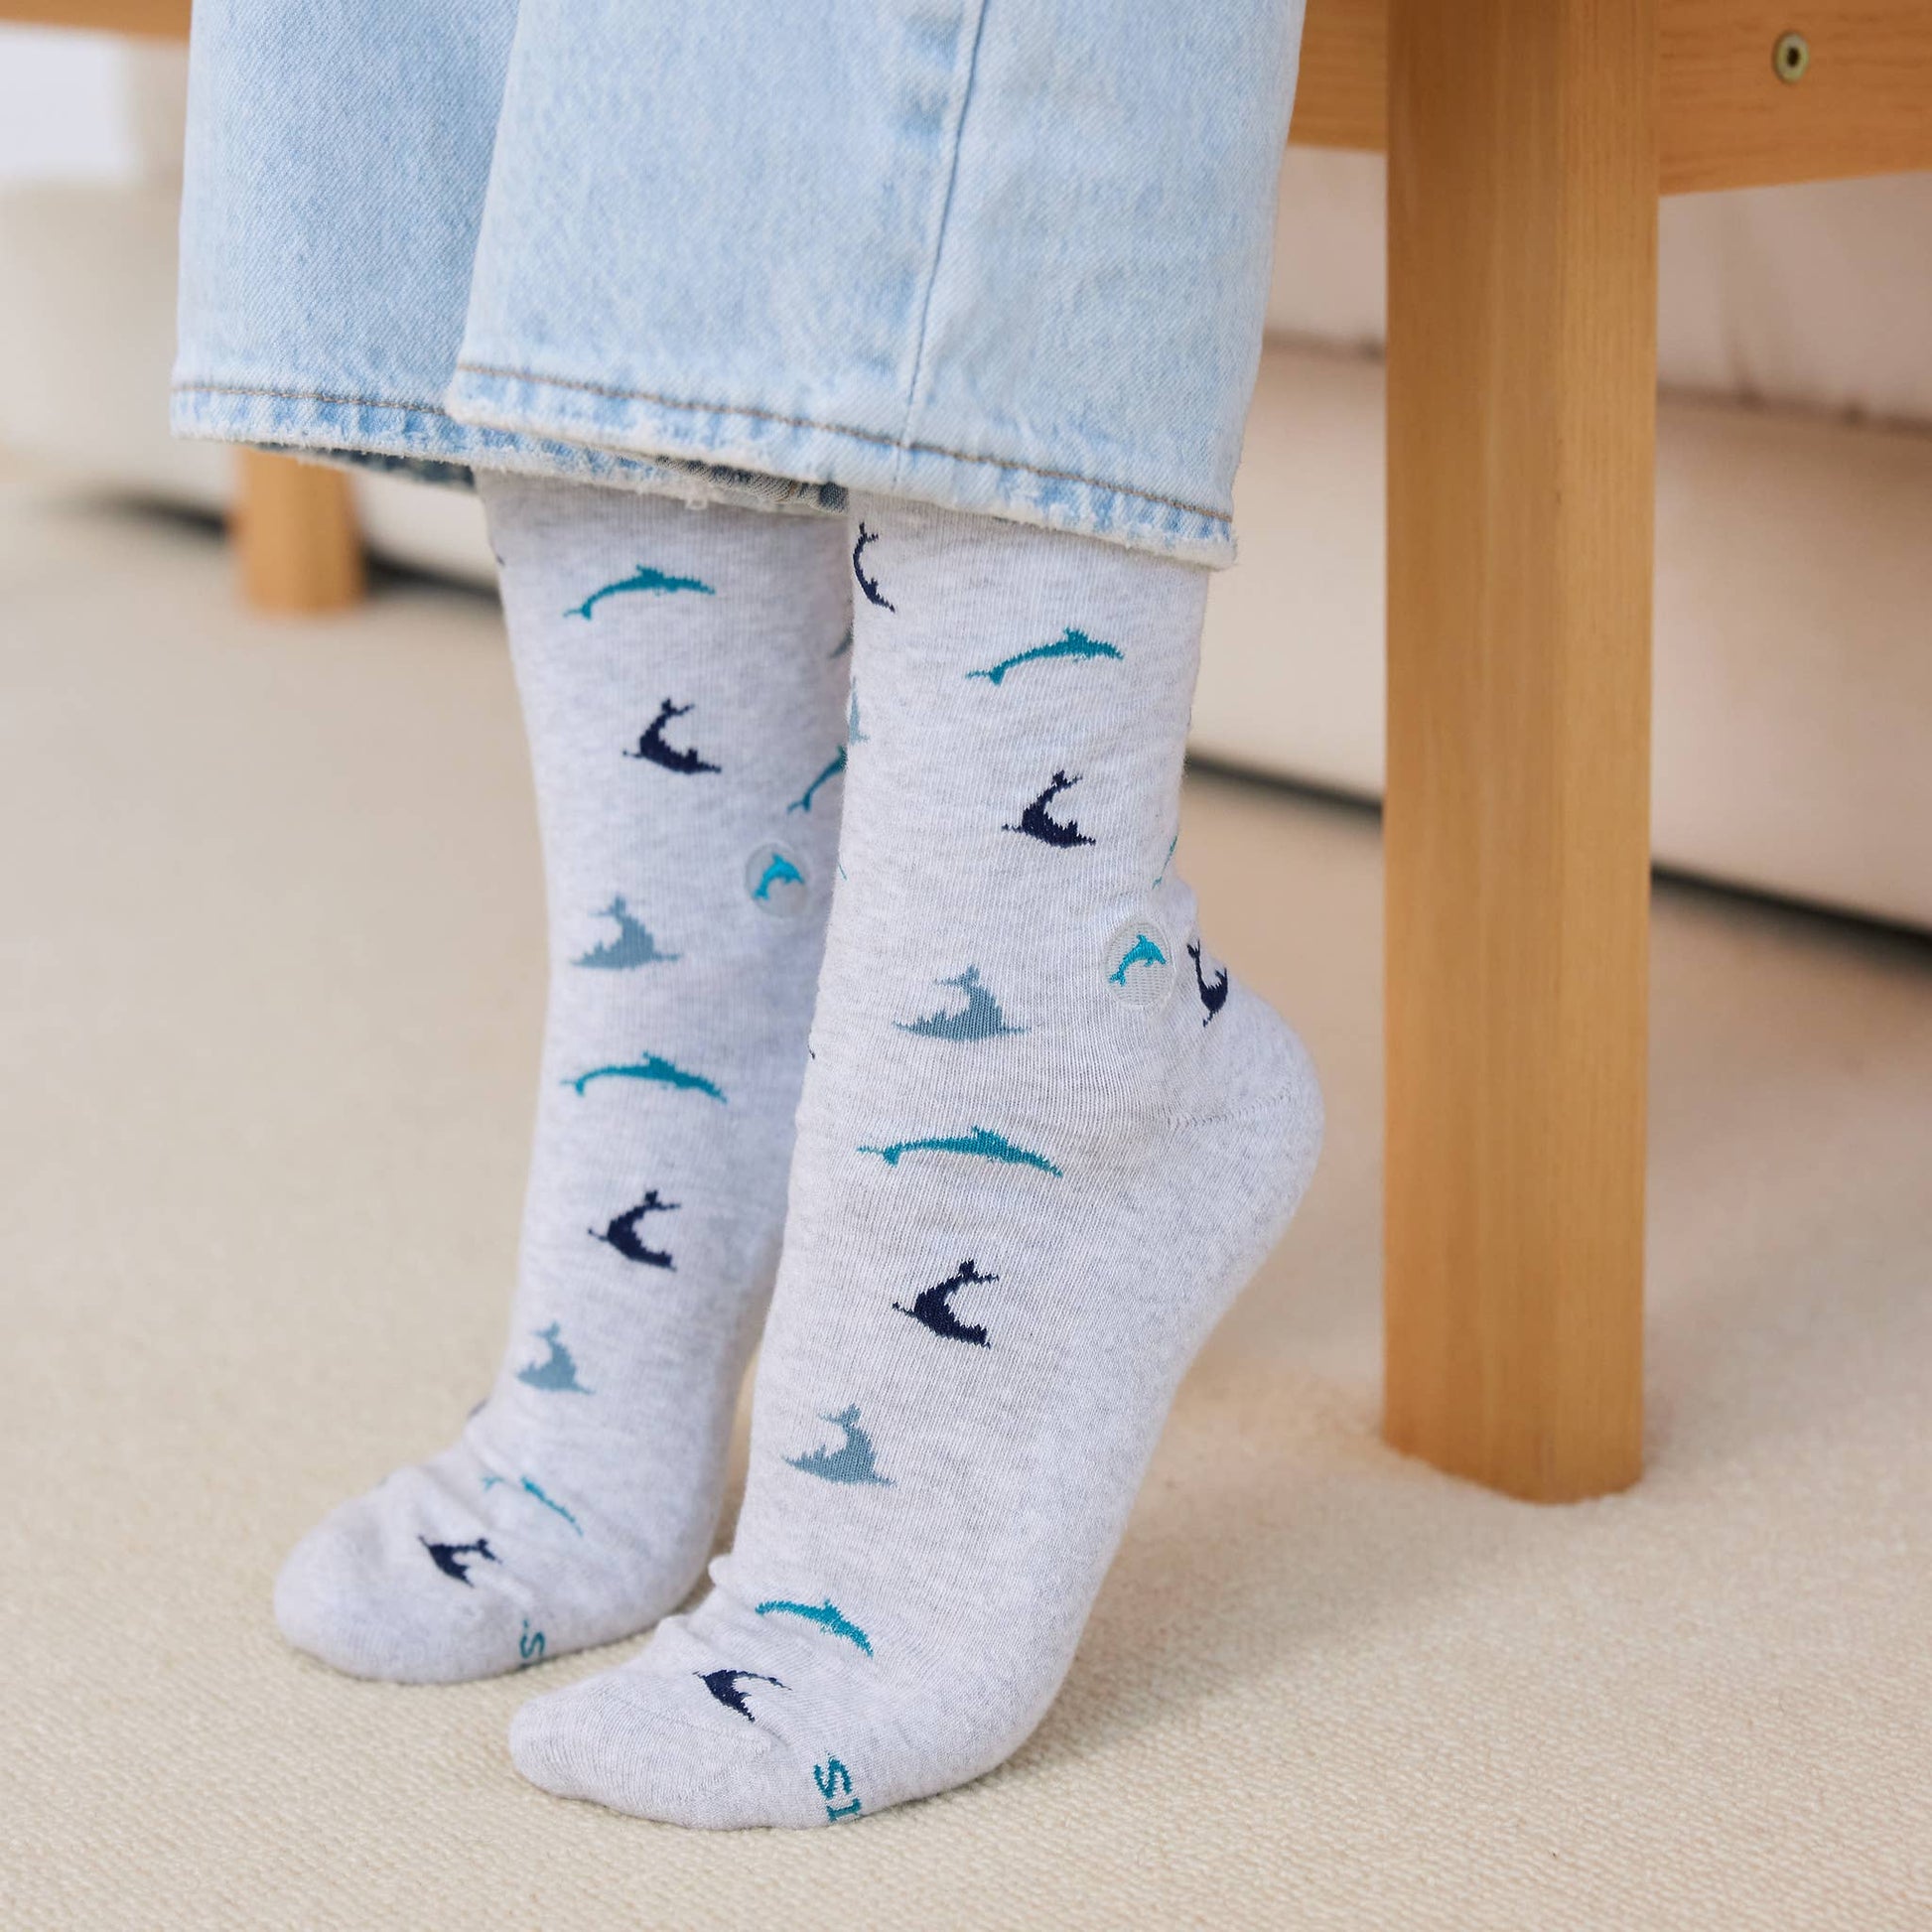 Conscious Step - Socks that Protect Dolphins  Conscious Step   -better made easy-eco-friendly-sustainable-gifting